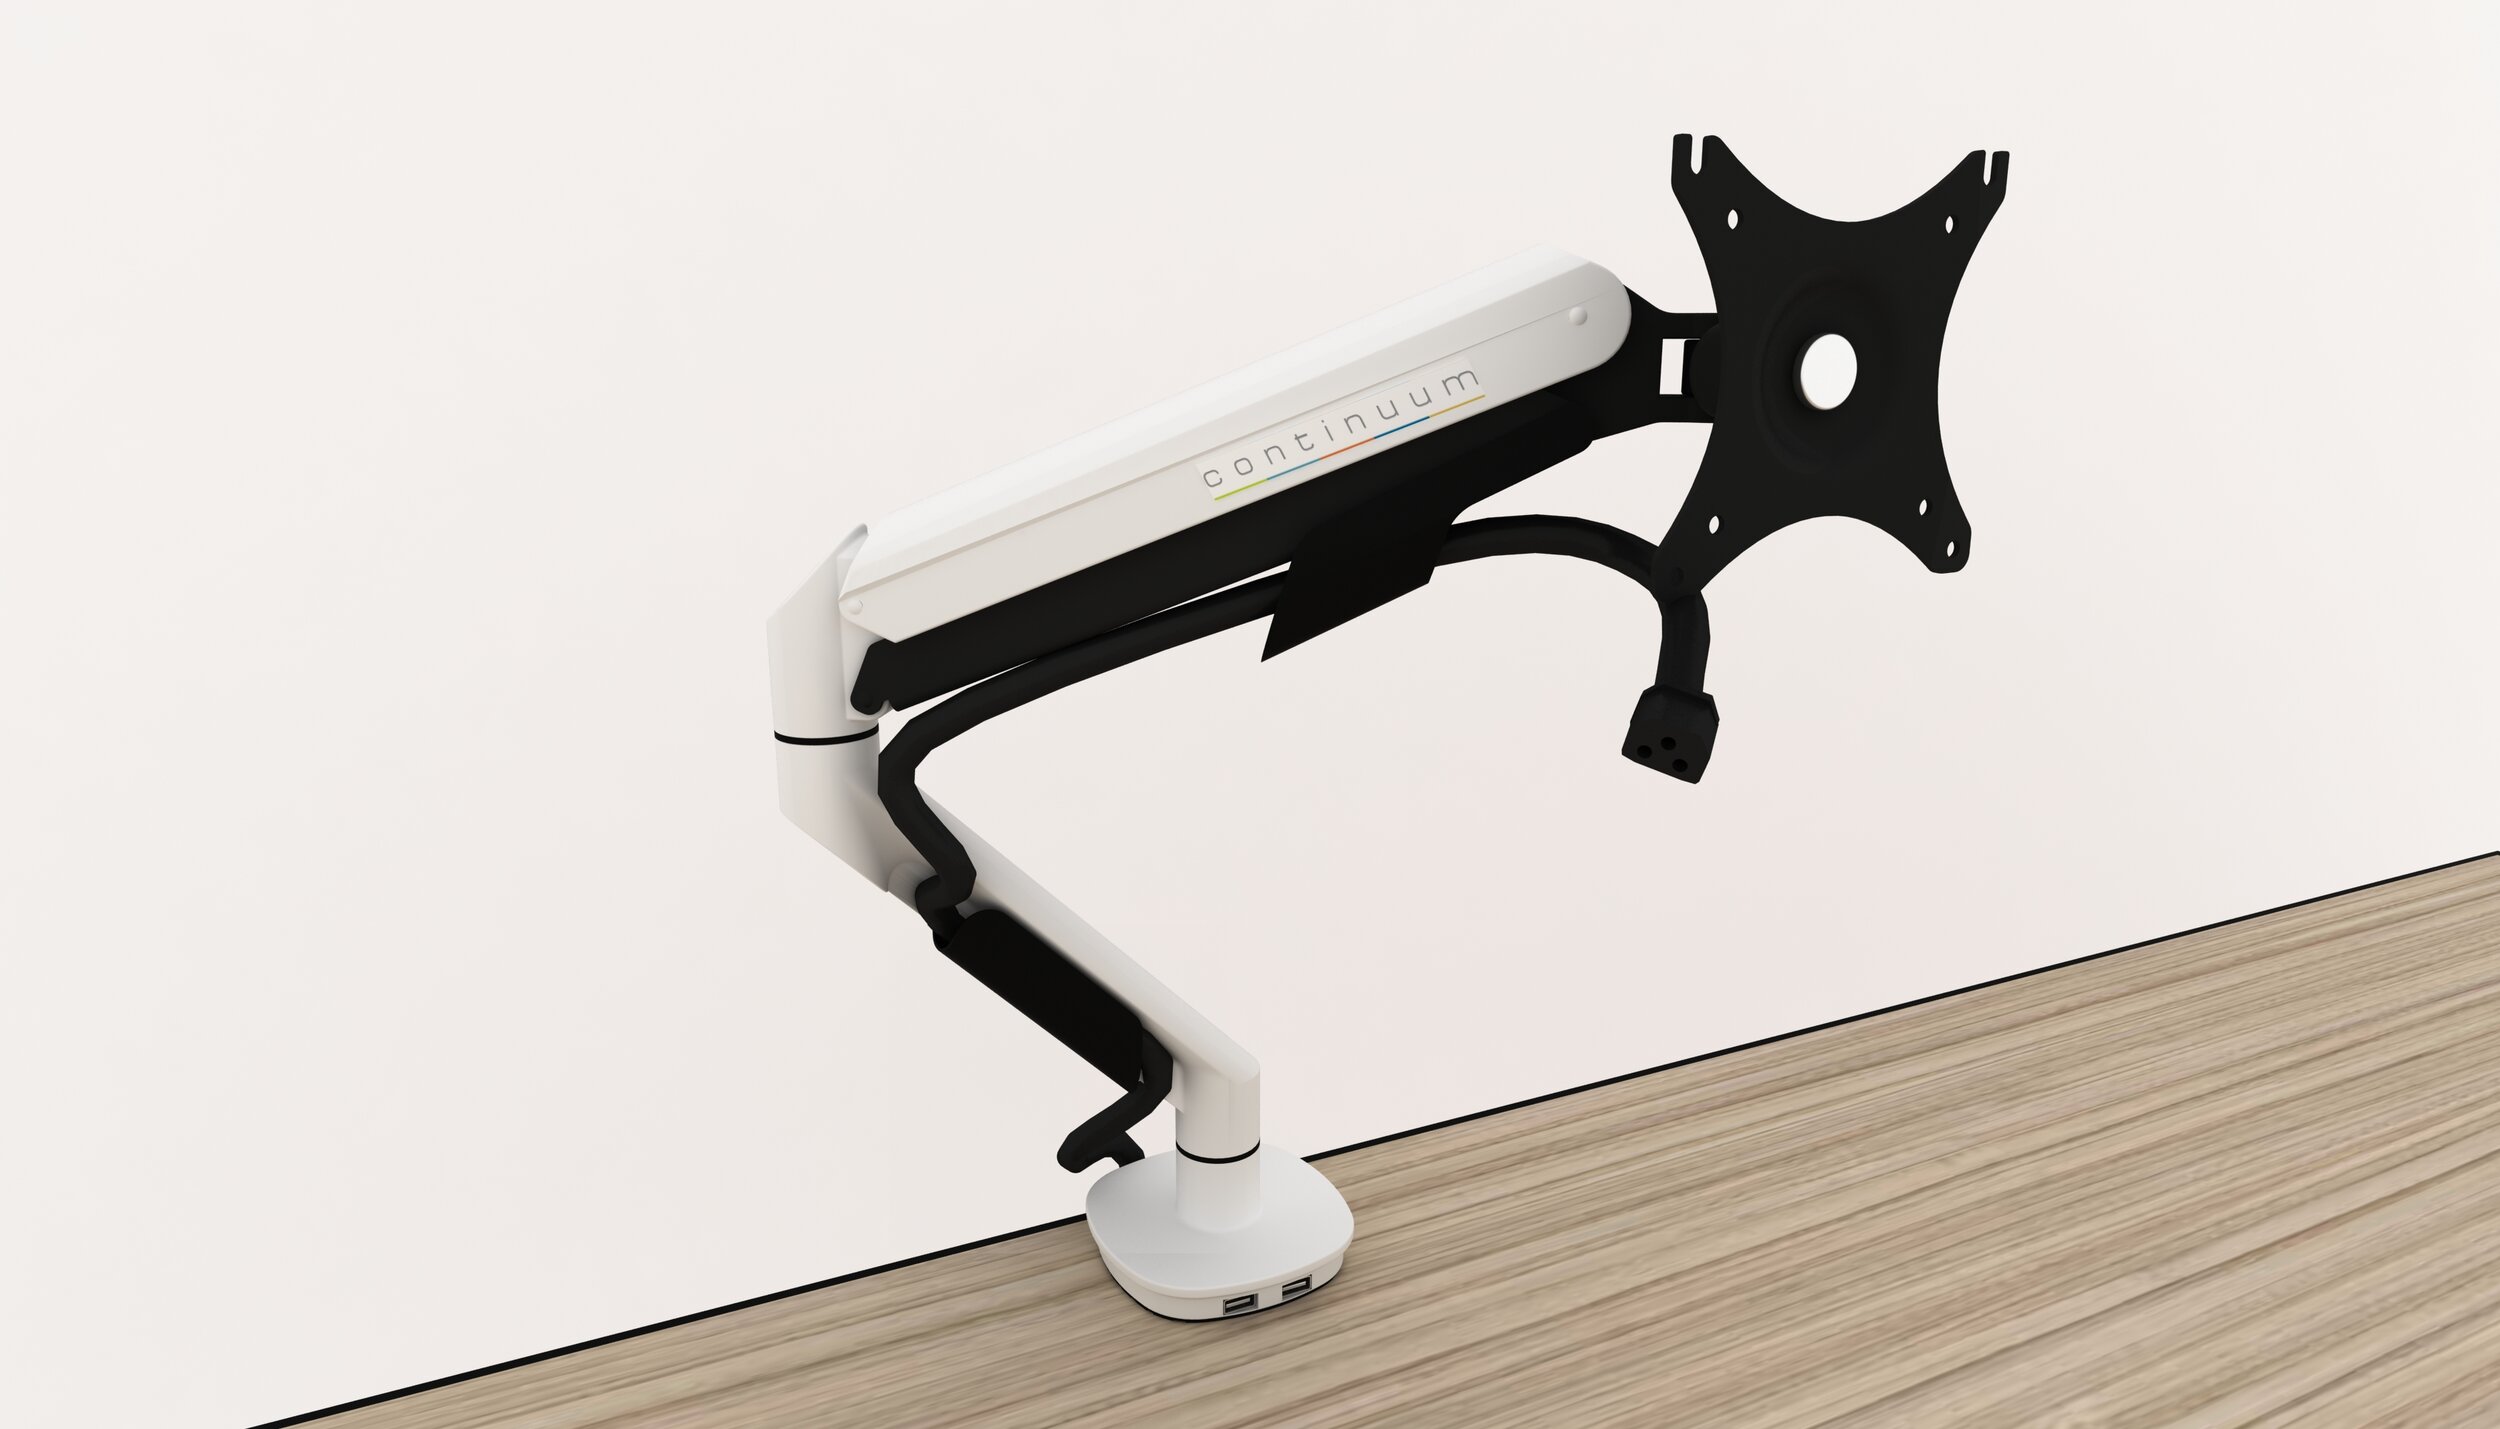 Monitor Arm Buying Guide